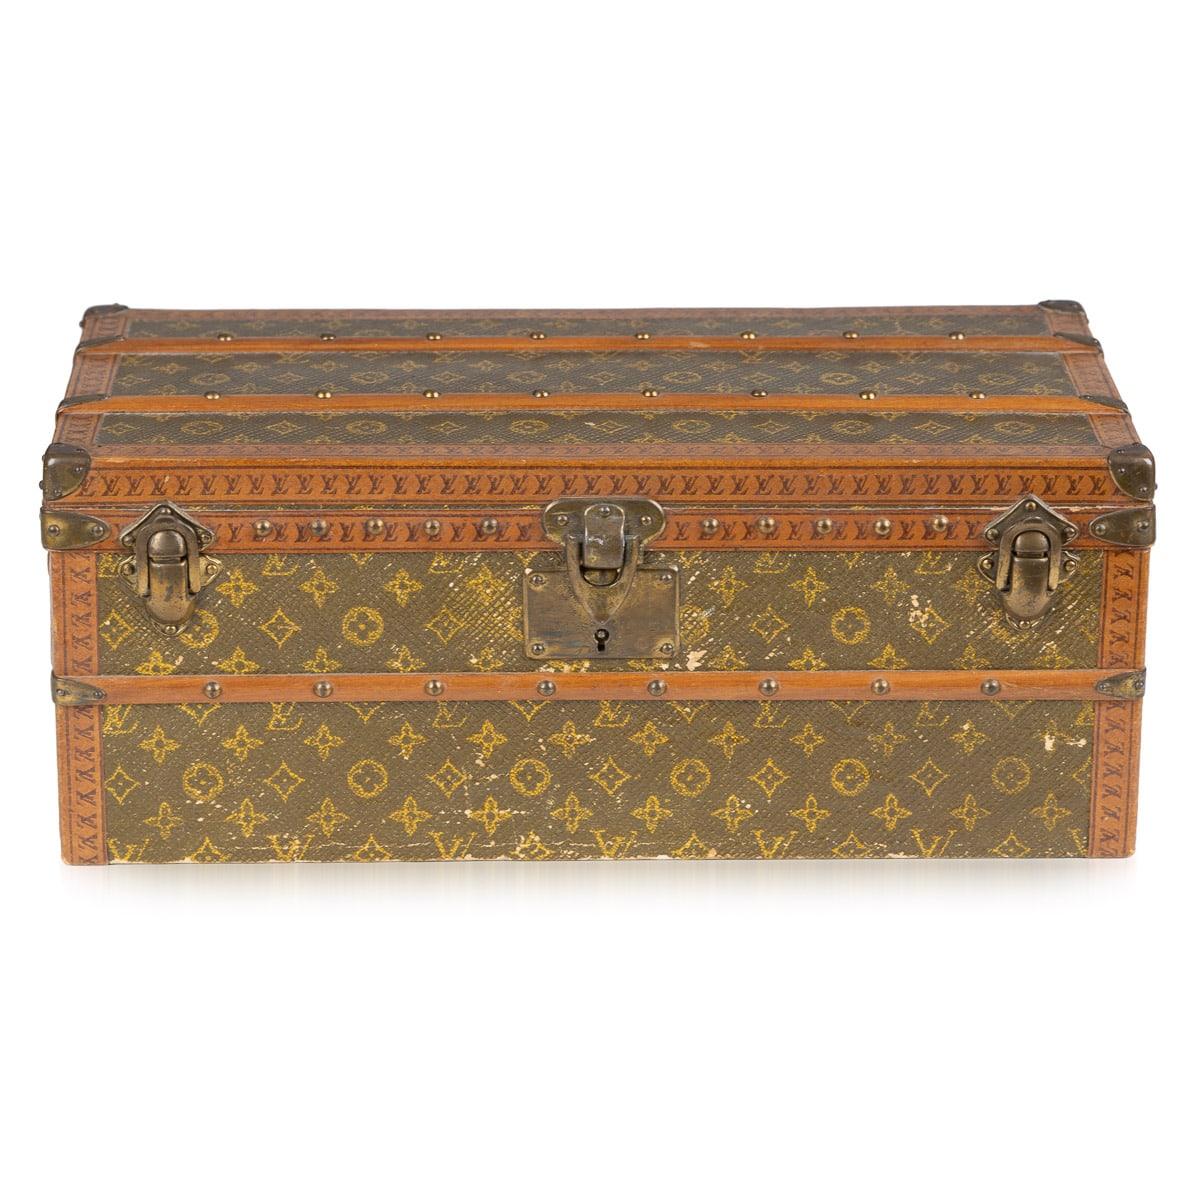 An extremely rare “malle fleurs“, or “flower trunk“ made by Louis Vuitton in the 1920s. These items are one of the rarest of trunks in circulation. Gaston Louis Vuitton had a company policy whereby no discounts were given. However in order to keep